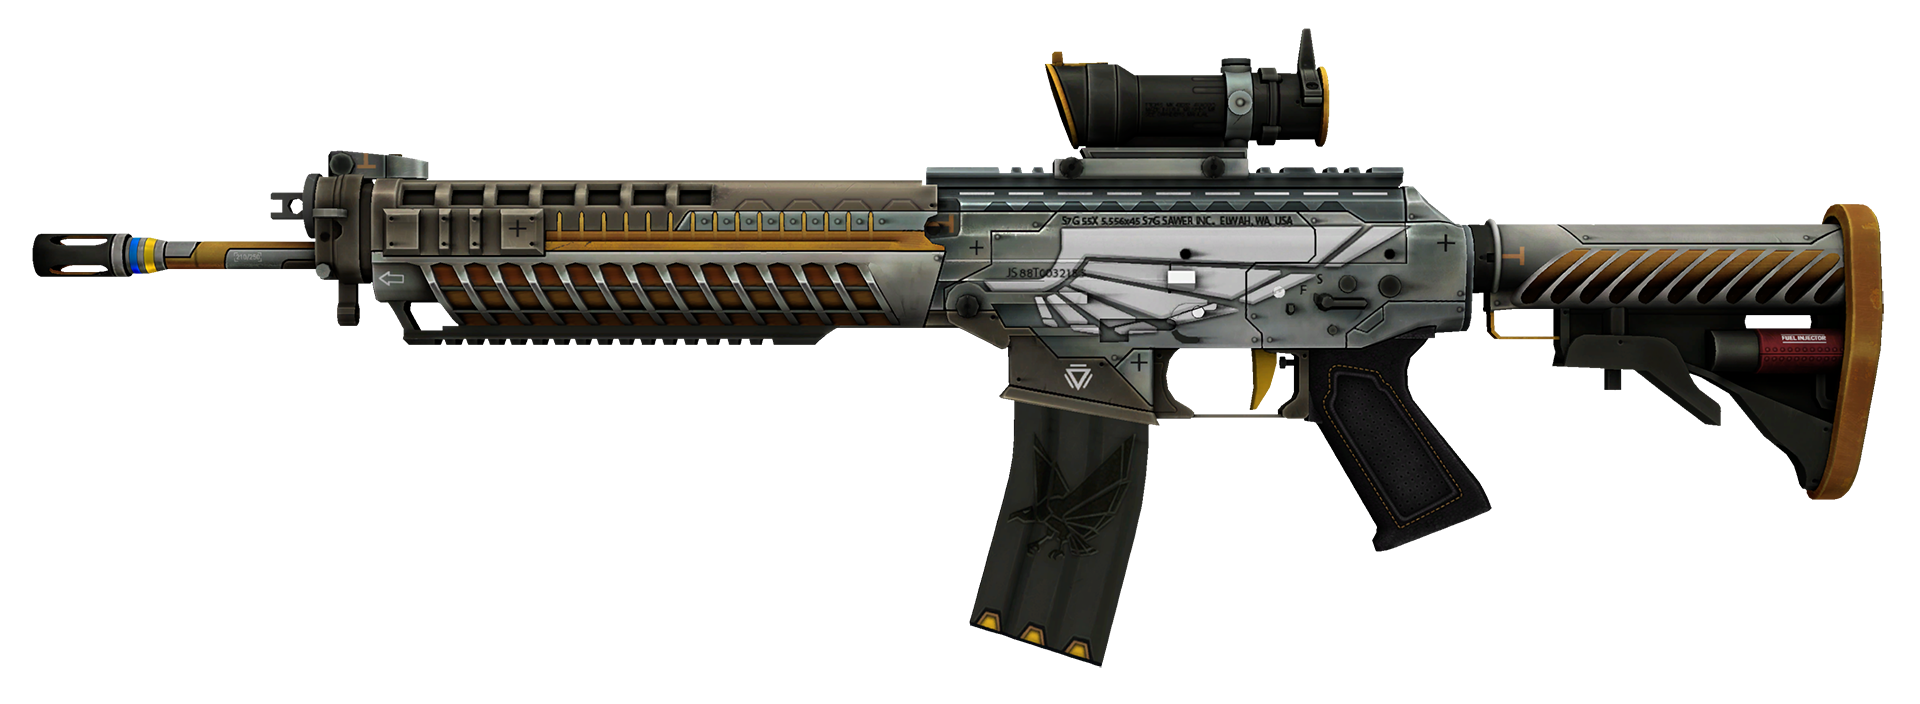 SG 553 Aerial cs go skin download the new for mac